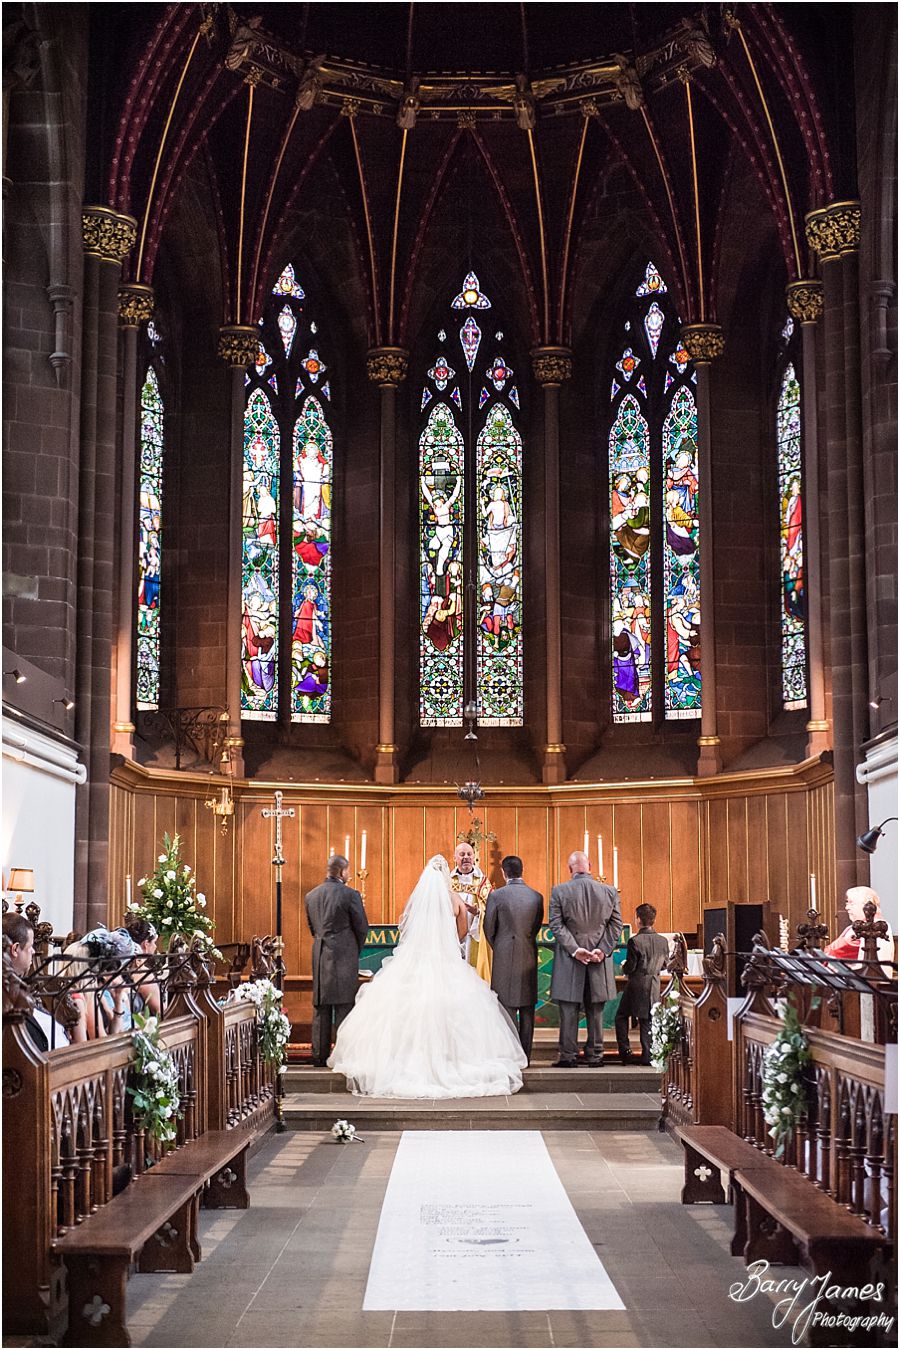 Contemporary and creative wedding photography at the Collegiate Church in Wolverhampton by Wolverhampton Wedding Photographer Barry James